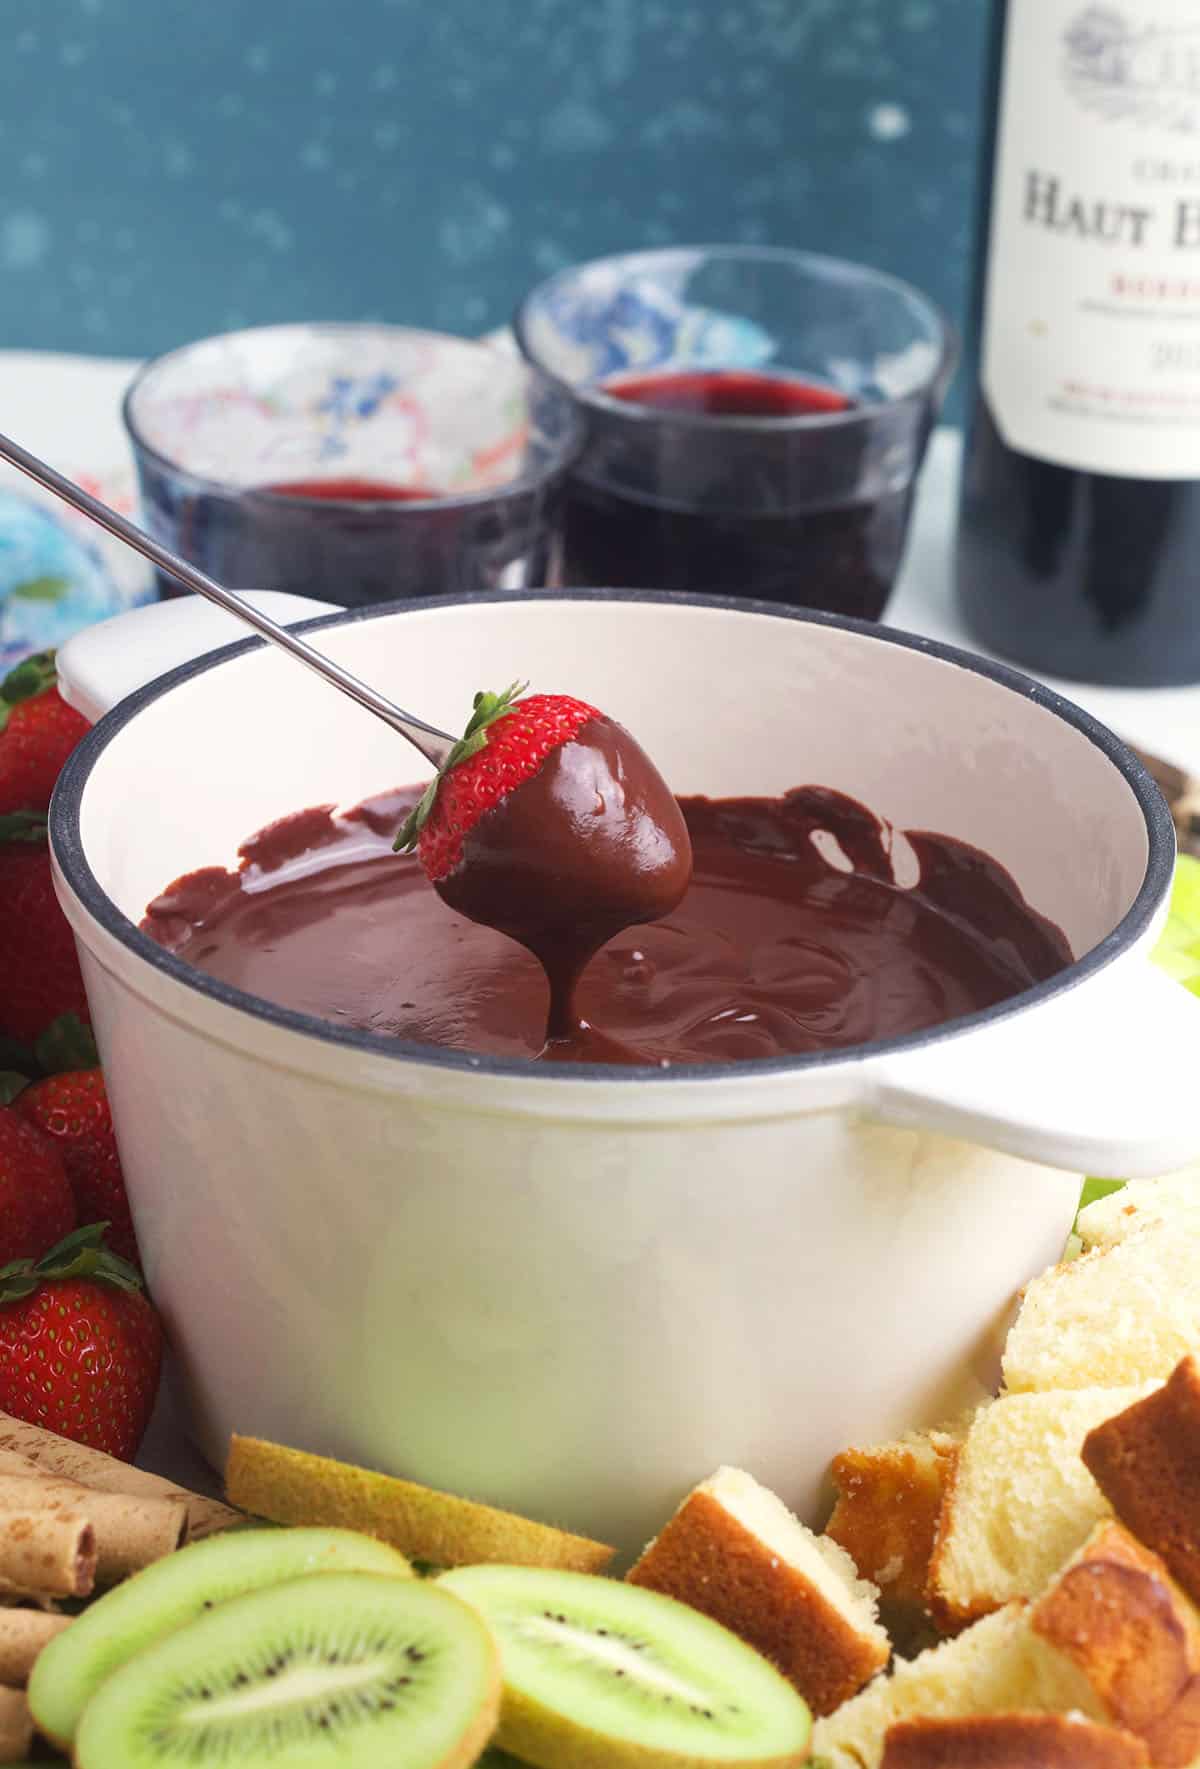 A strawberry is being dipped in chocolate fondue.